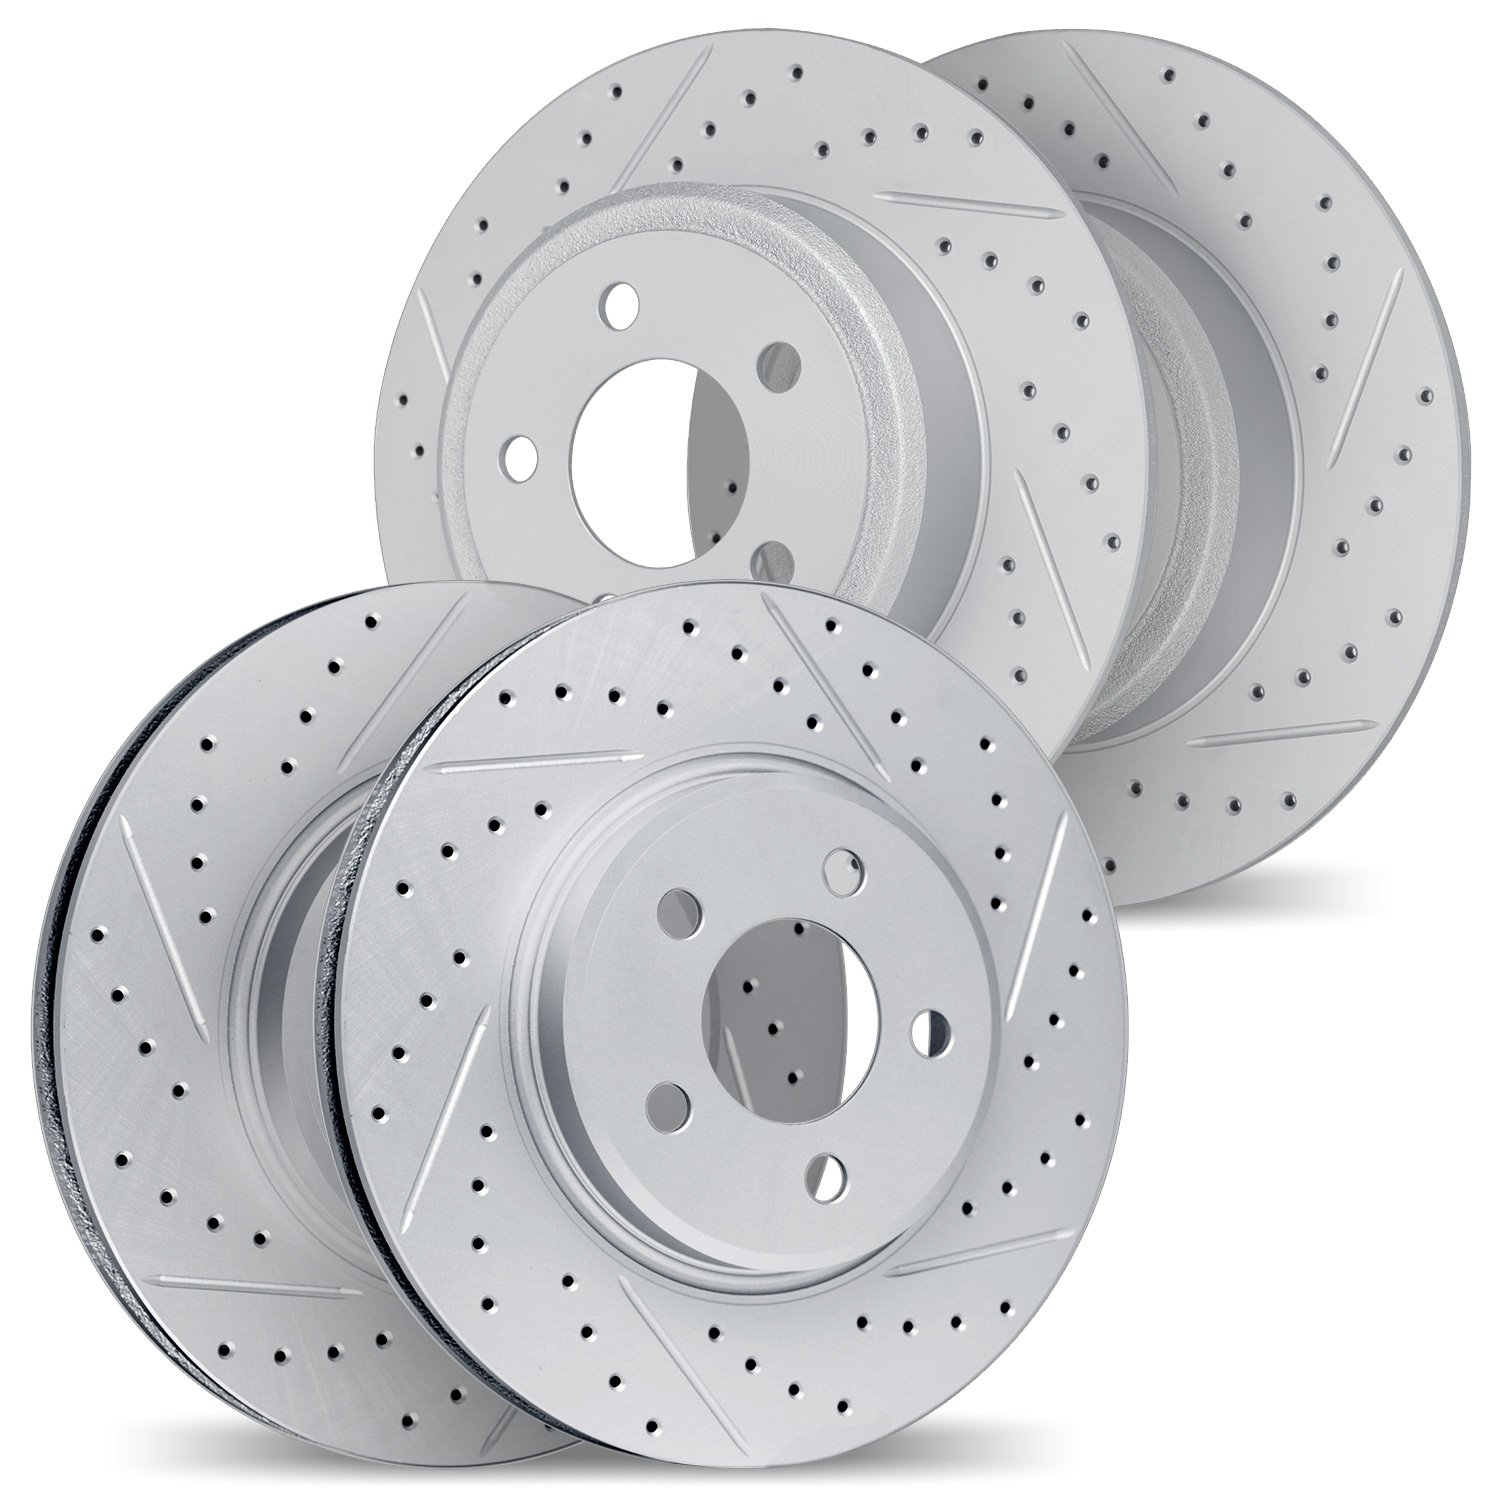 2004-72027 Geoperformance Drilled/Slotted Brake Rotors, 2009-2015 Mitsubishi, Position: Front and Rear